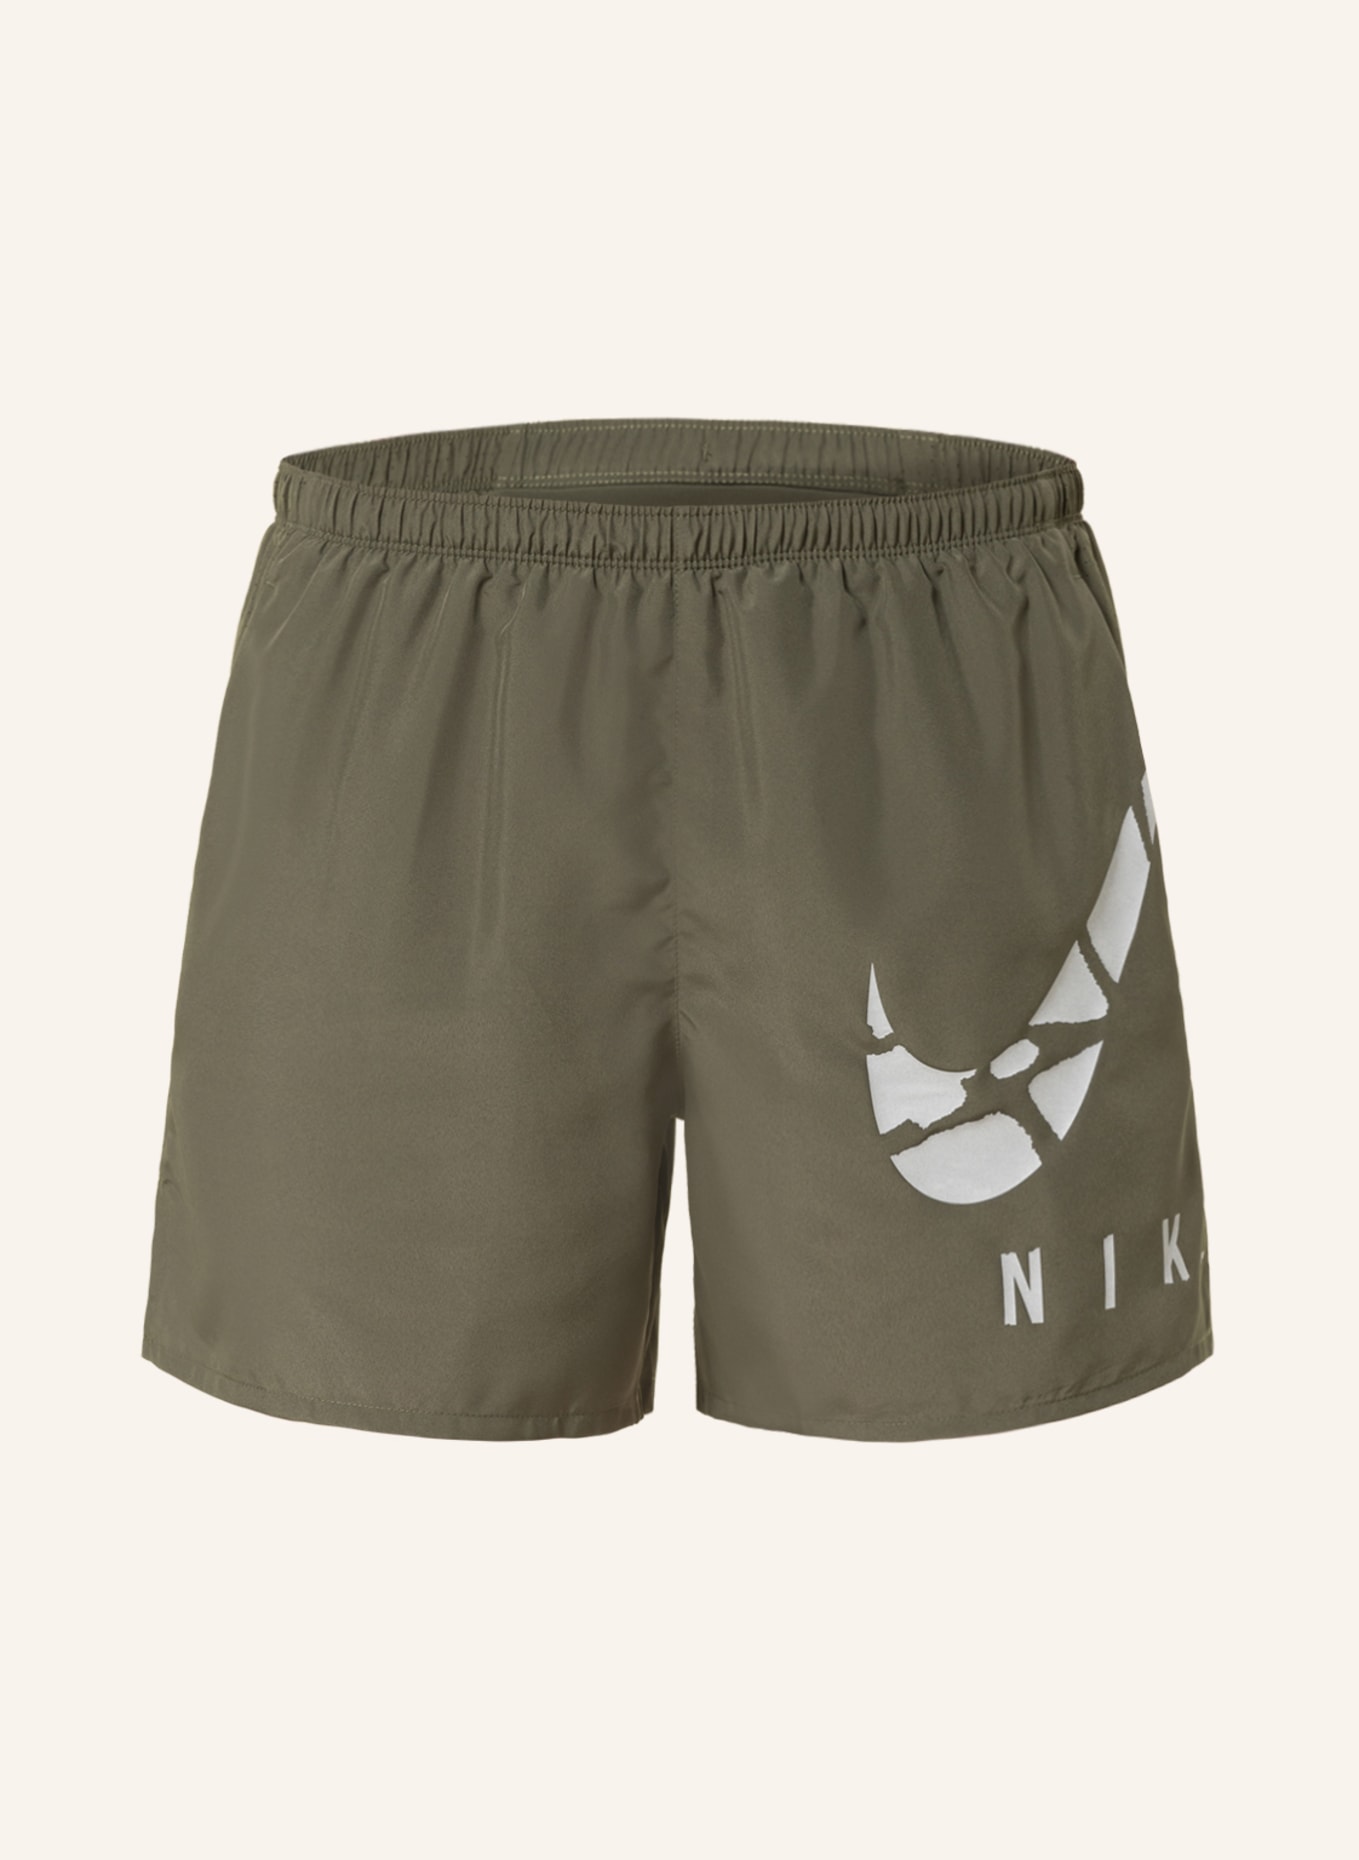 Nike 2-in-1 running shorts DRI-FIT CHALLENGER RUN DIVISION in olive